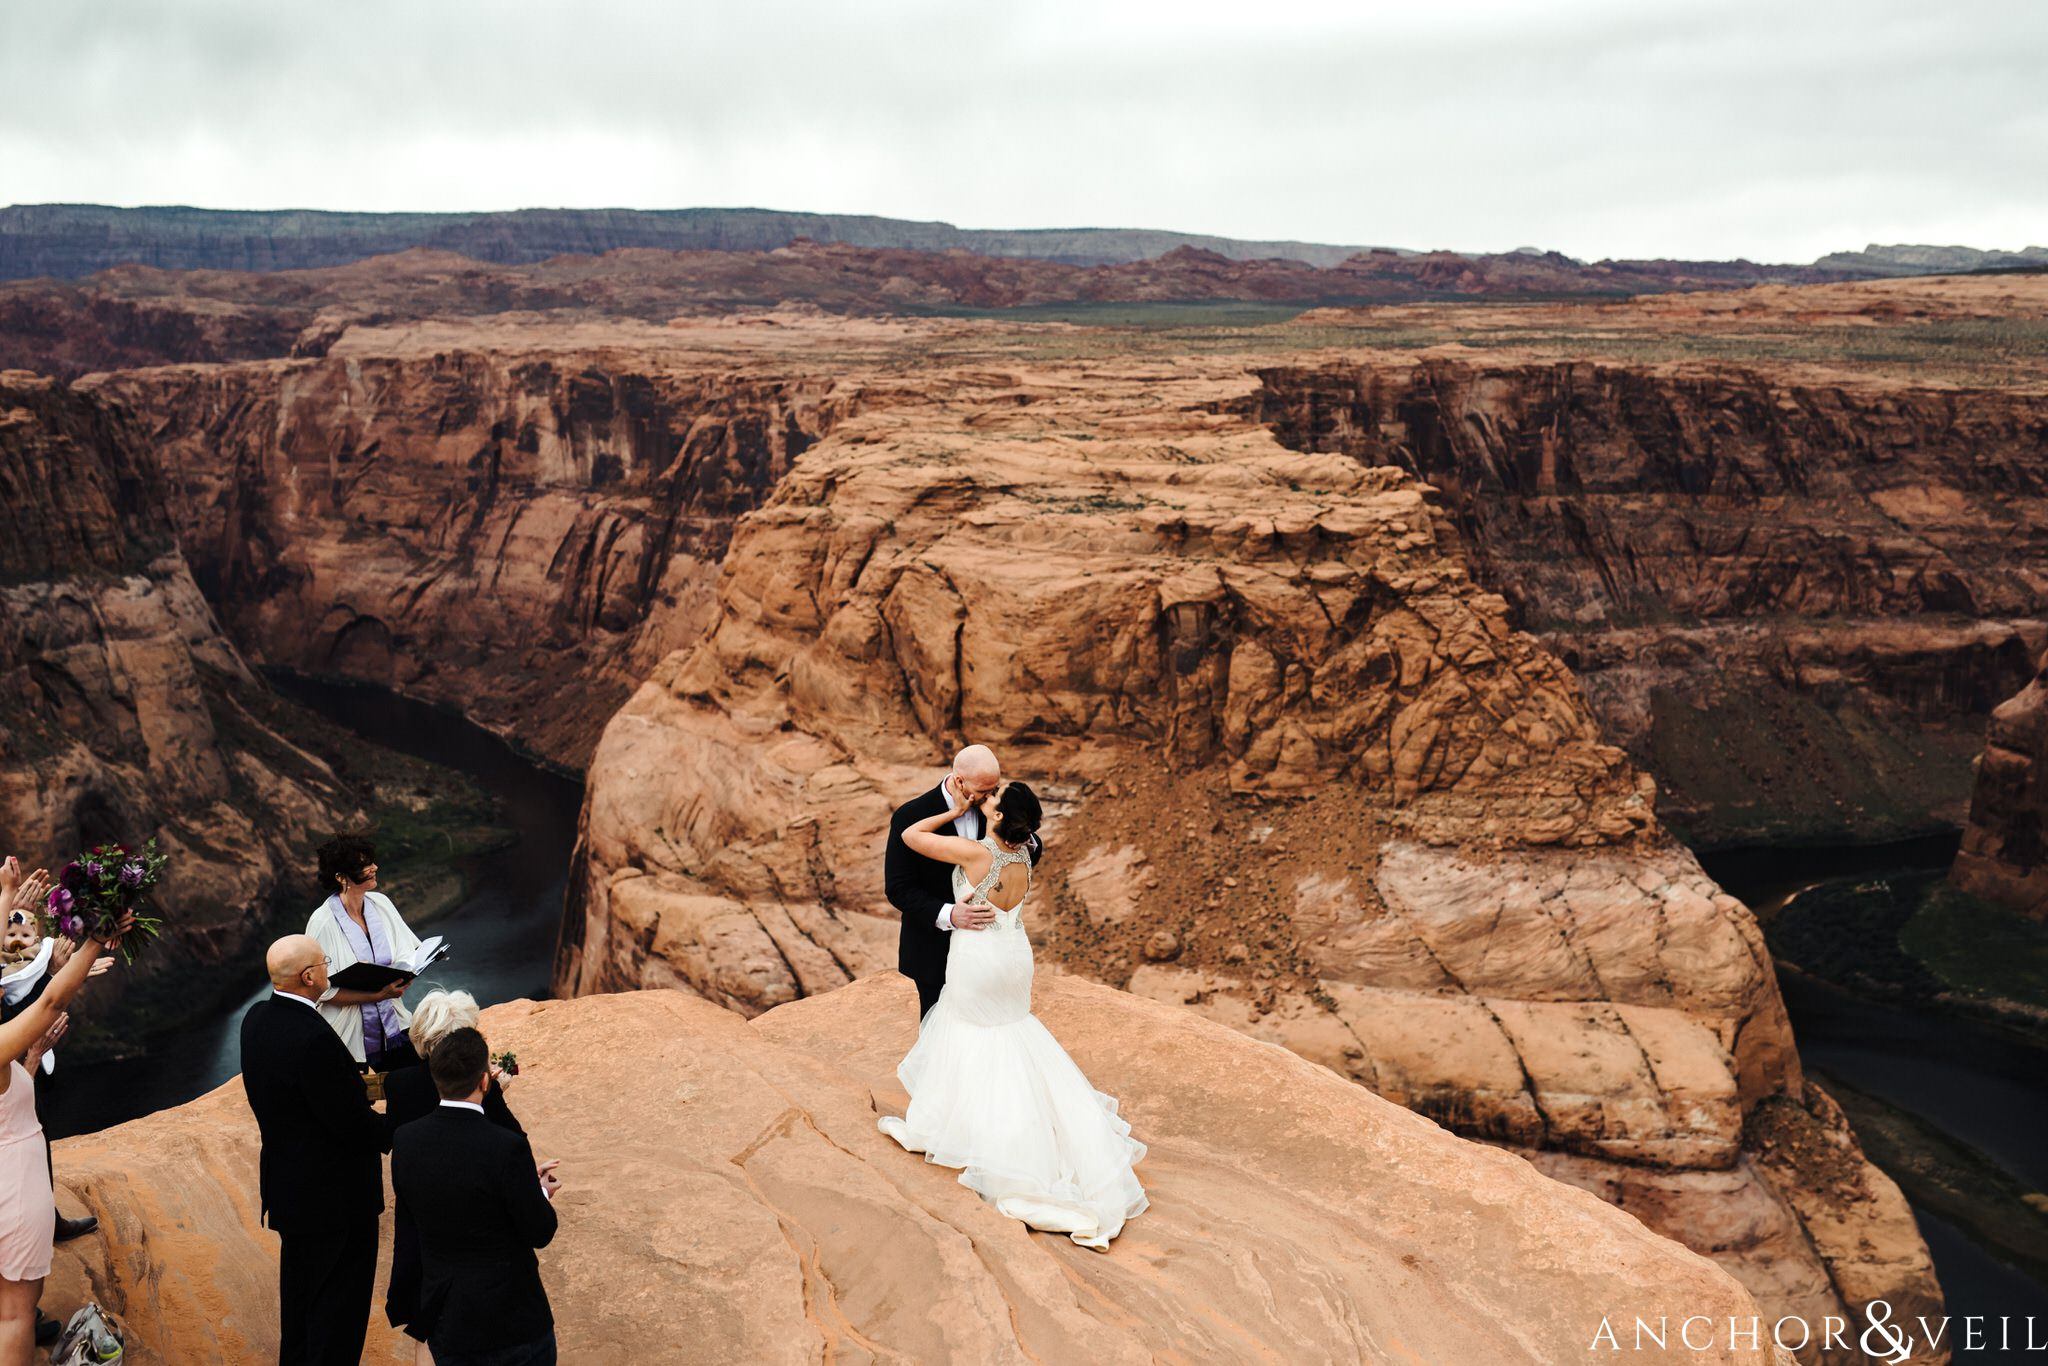 the first kiss during their Horseshoe Bend Elopement Wedding